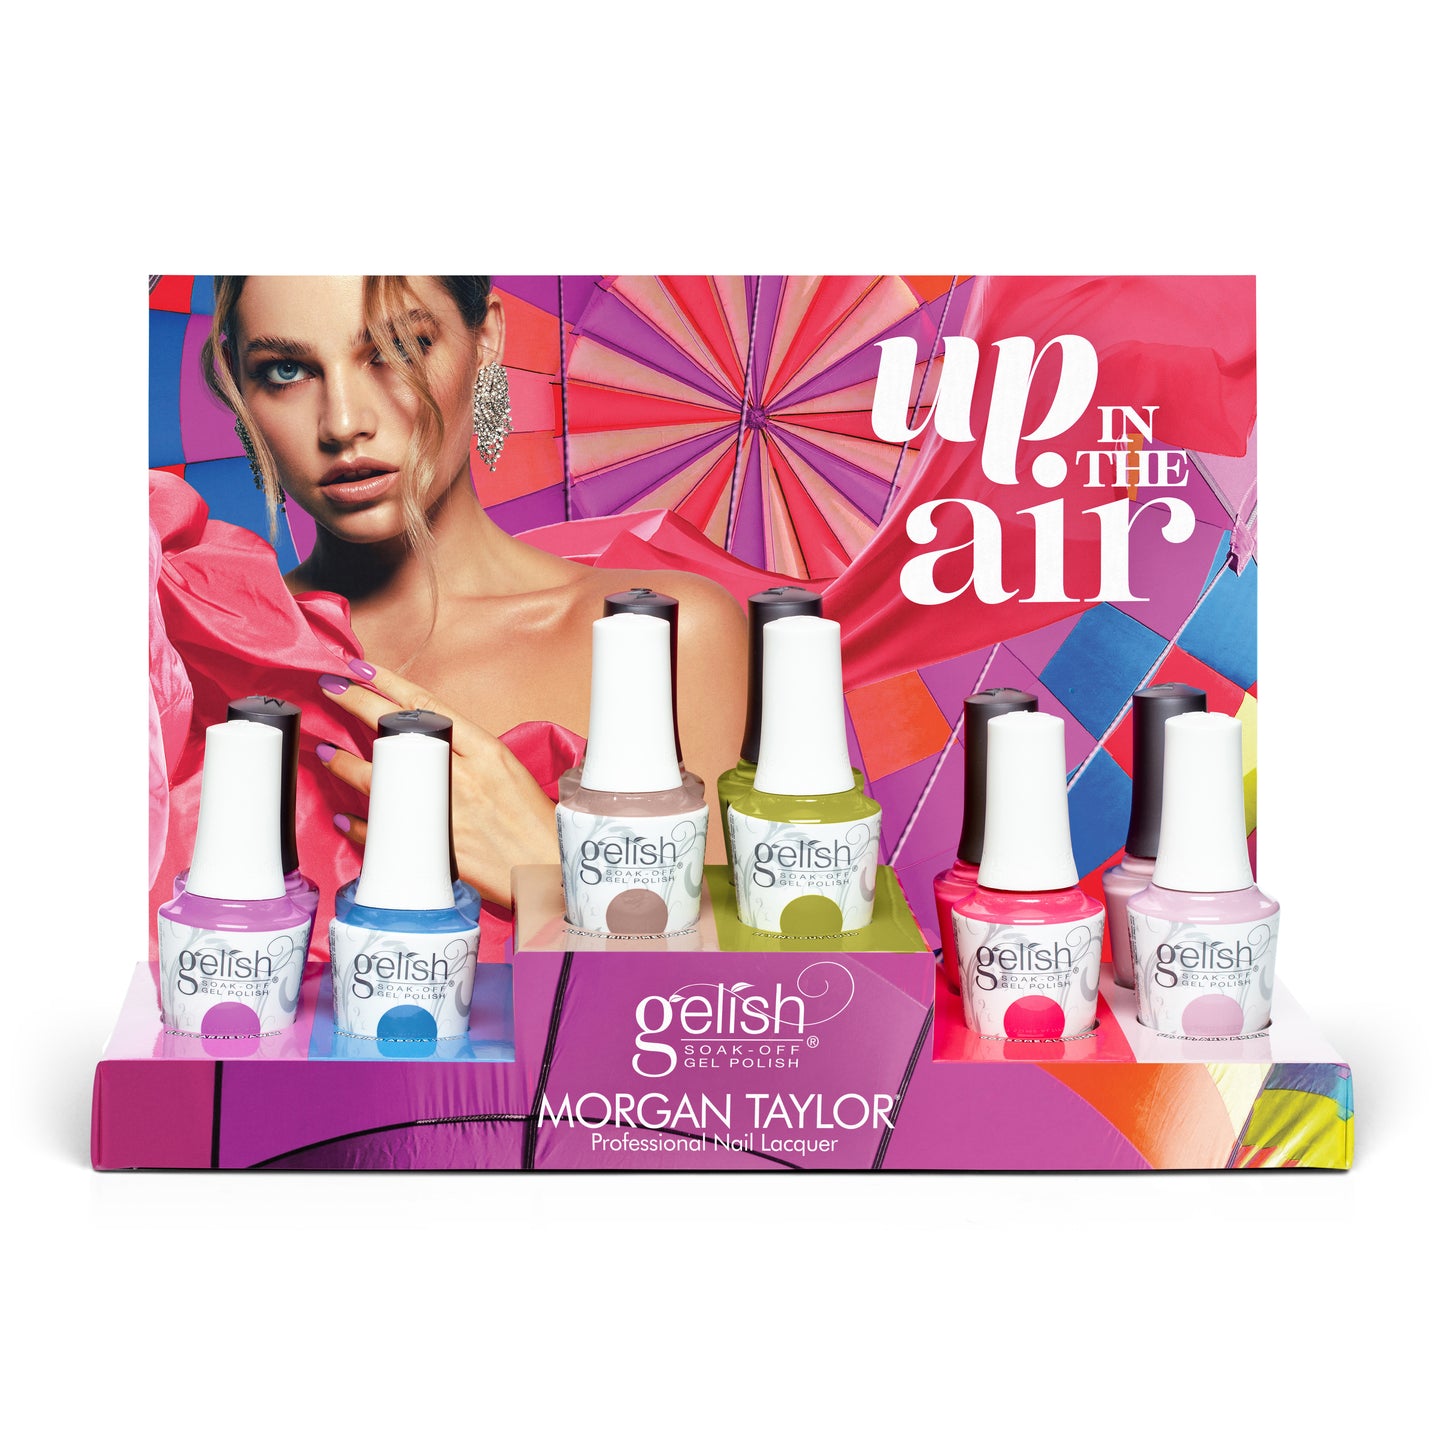 Gelish Morgan Taylor Up In The Air, Mixed Collection Display, 12 Piece